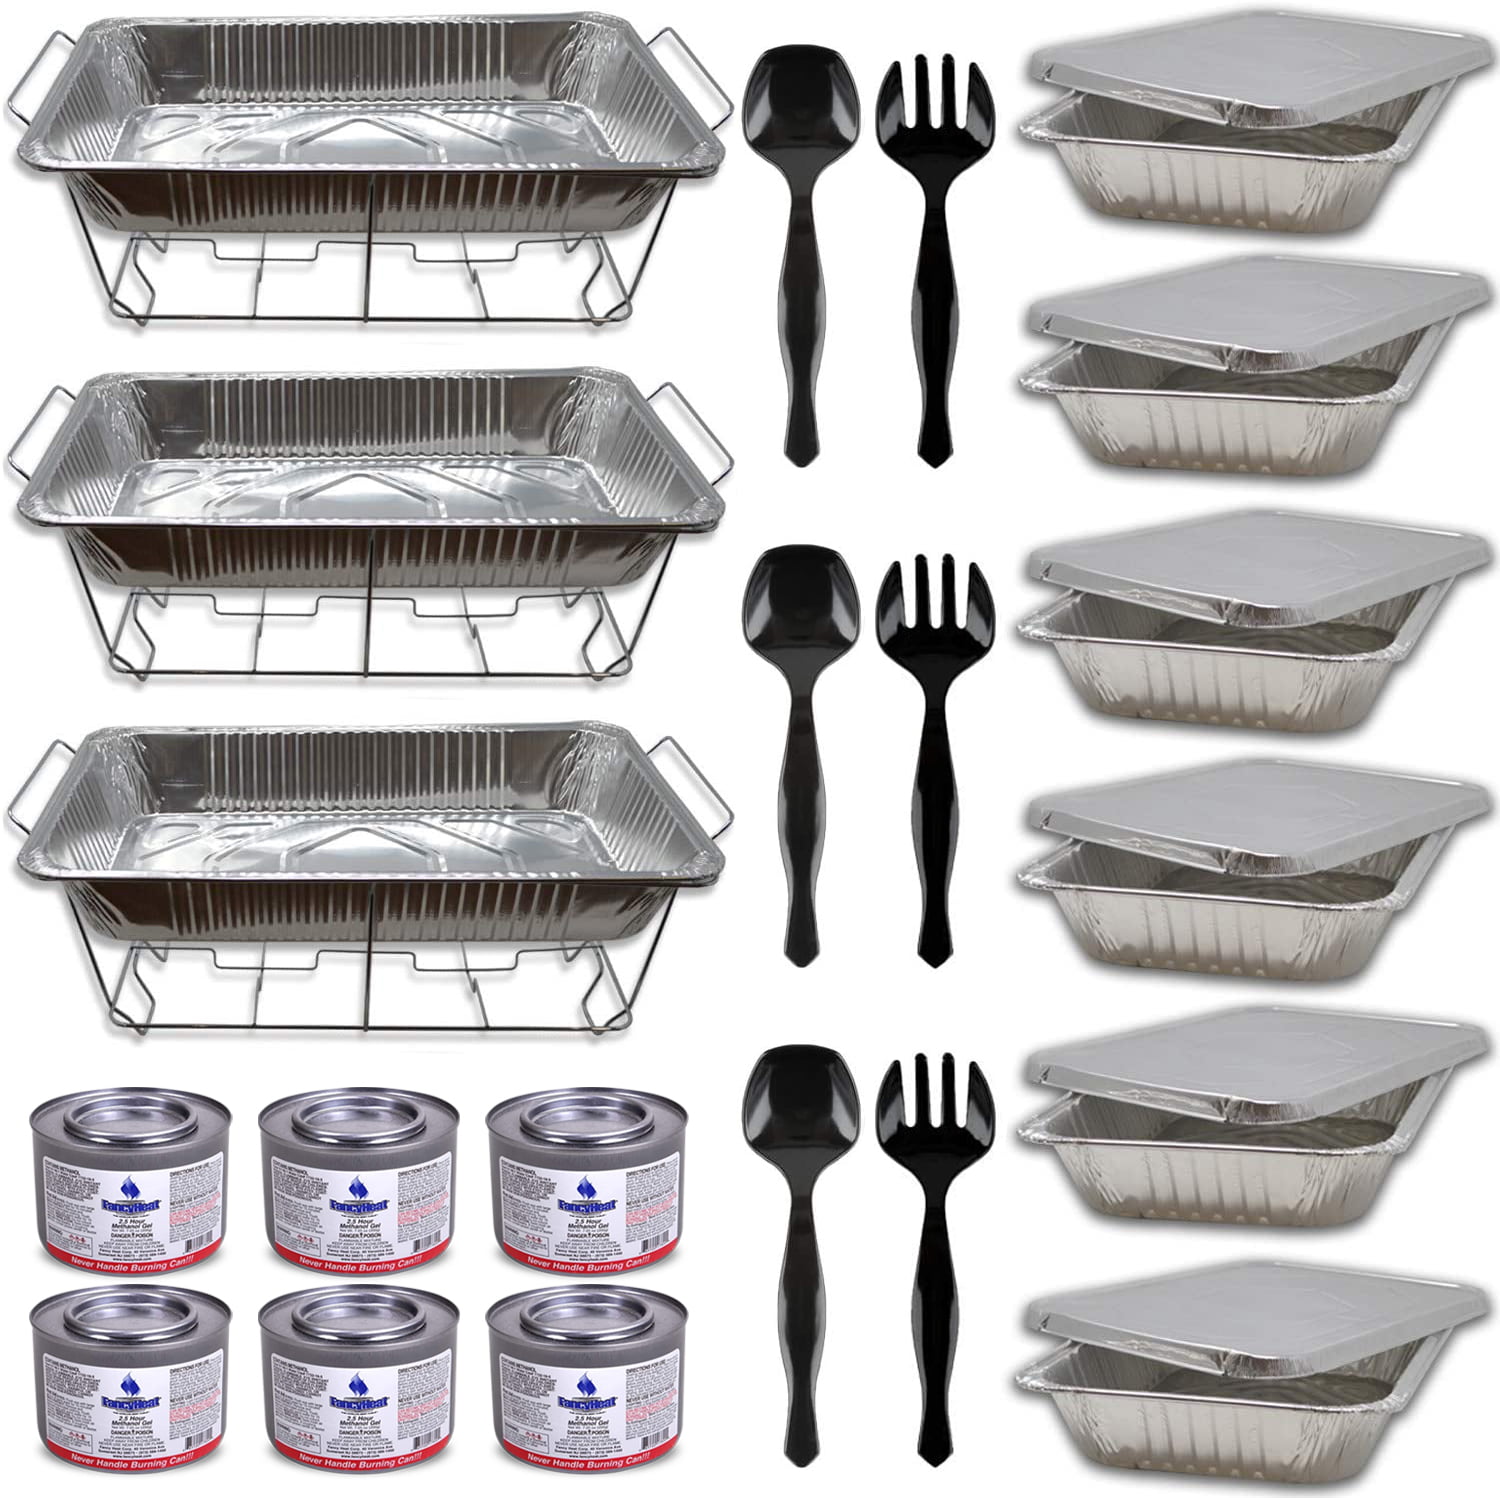 Bake And Carry Disposable Buffet Sets/Chafing Dishes/Food warmers Different Sizes available. 12 Piece Buffet Set 